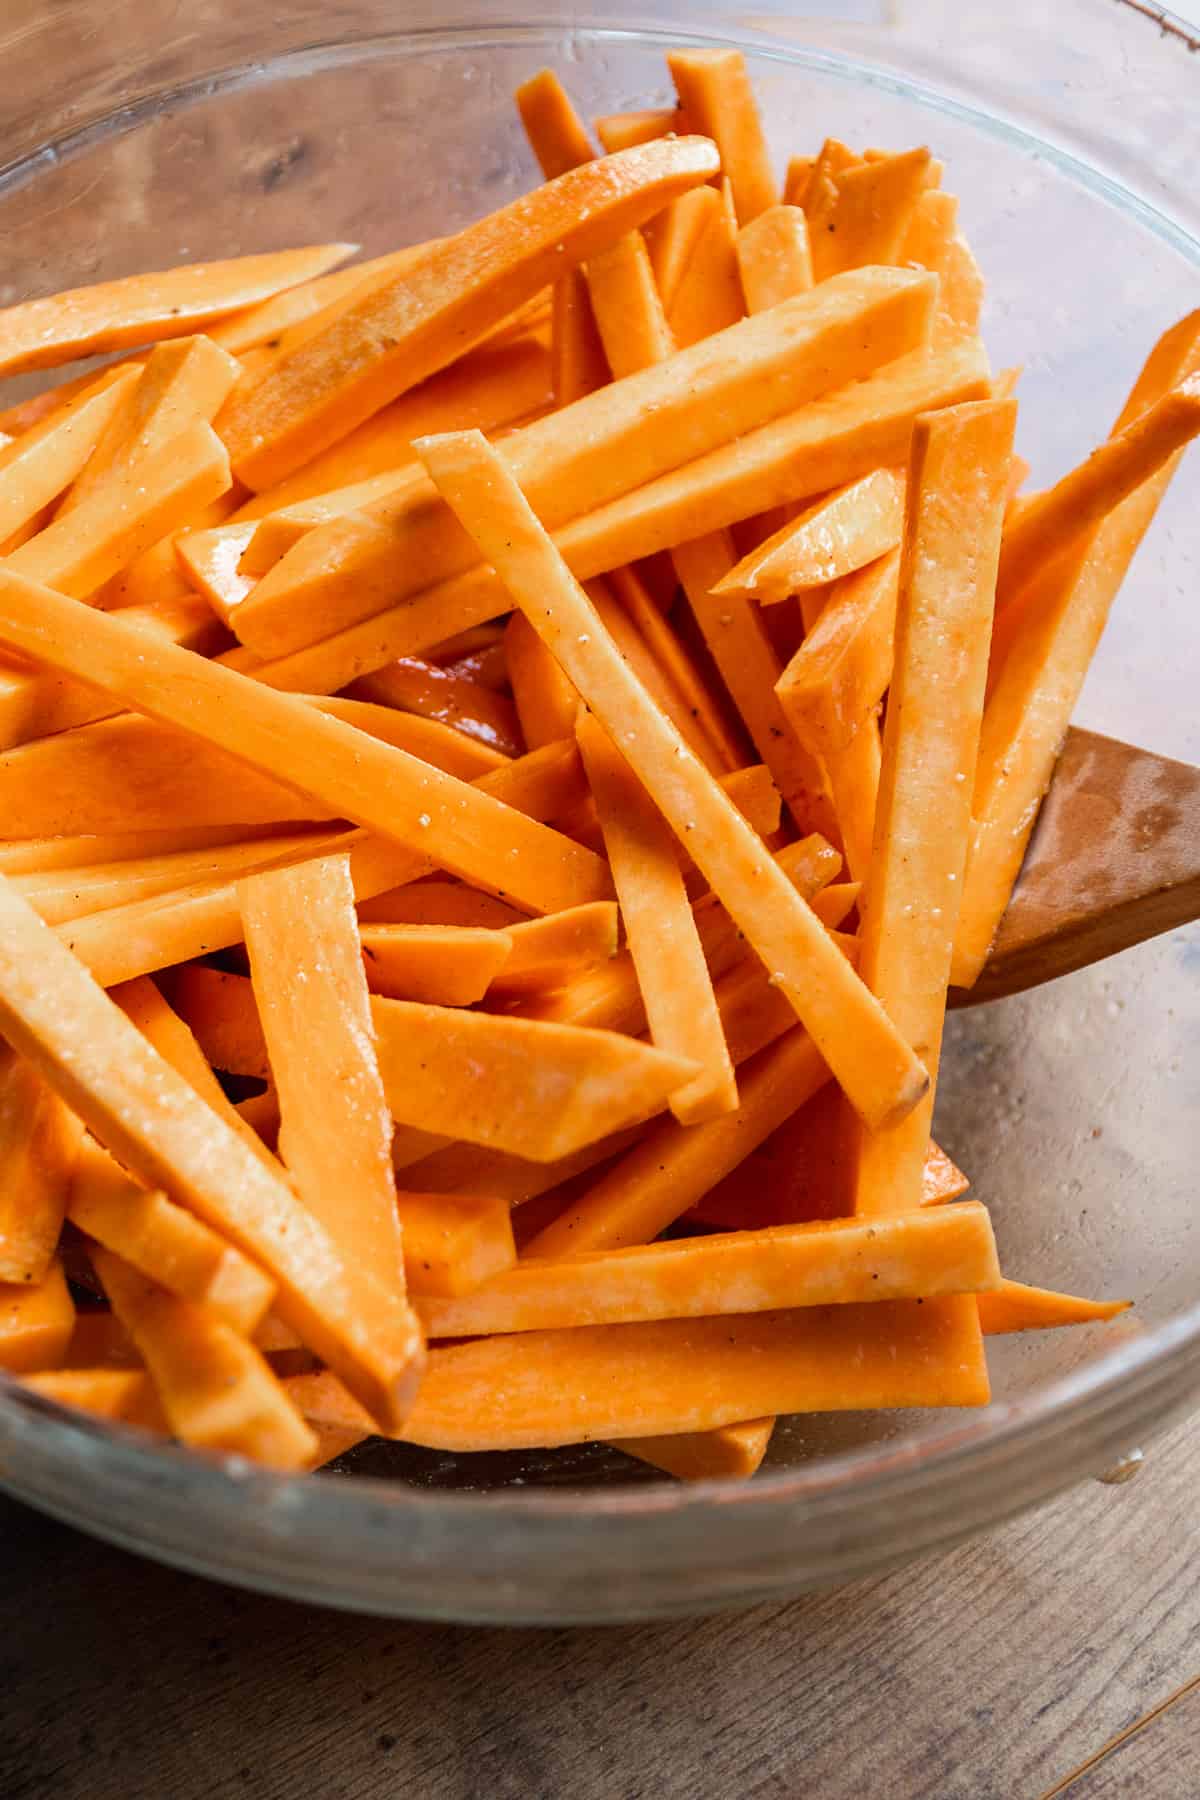 Sweet potato fries tossed in oil and spices in a glass bowl.